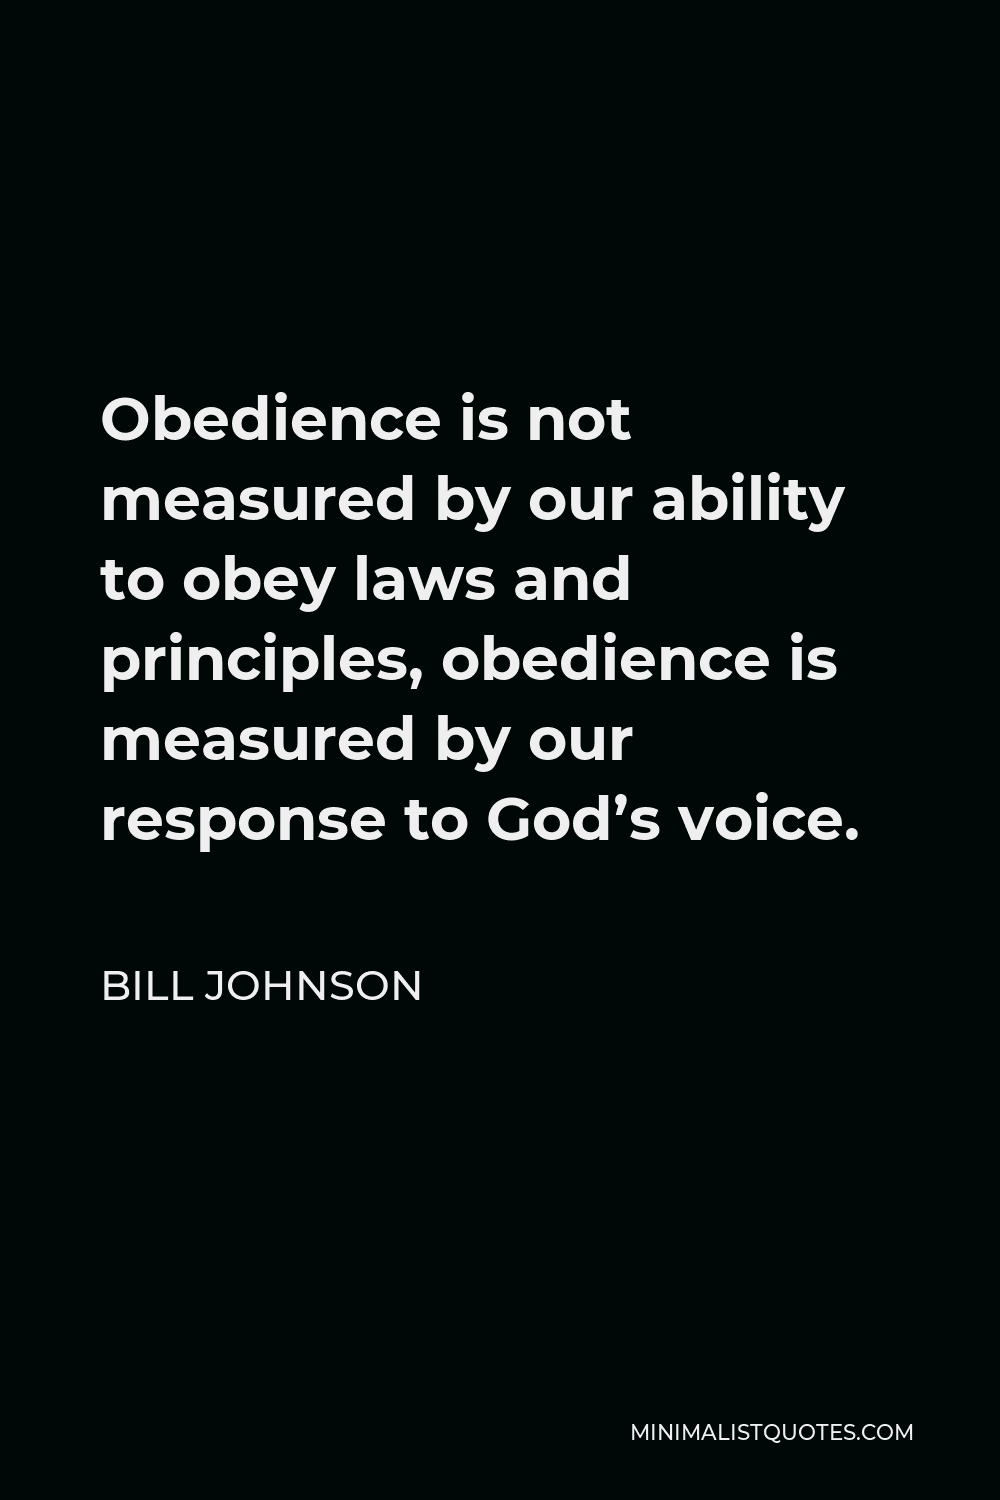 Bill Johnson Quote - Obedience is not measured by our ability to obey laws and principles, obedience is measured by our response to God’s voice.